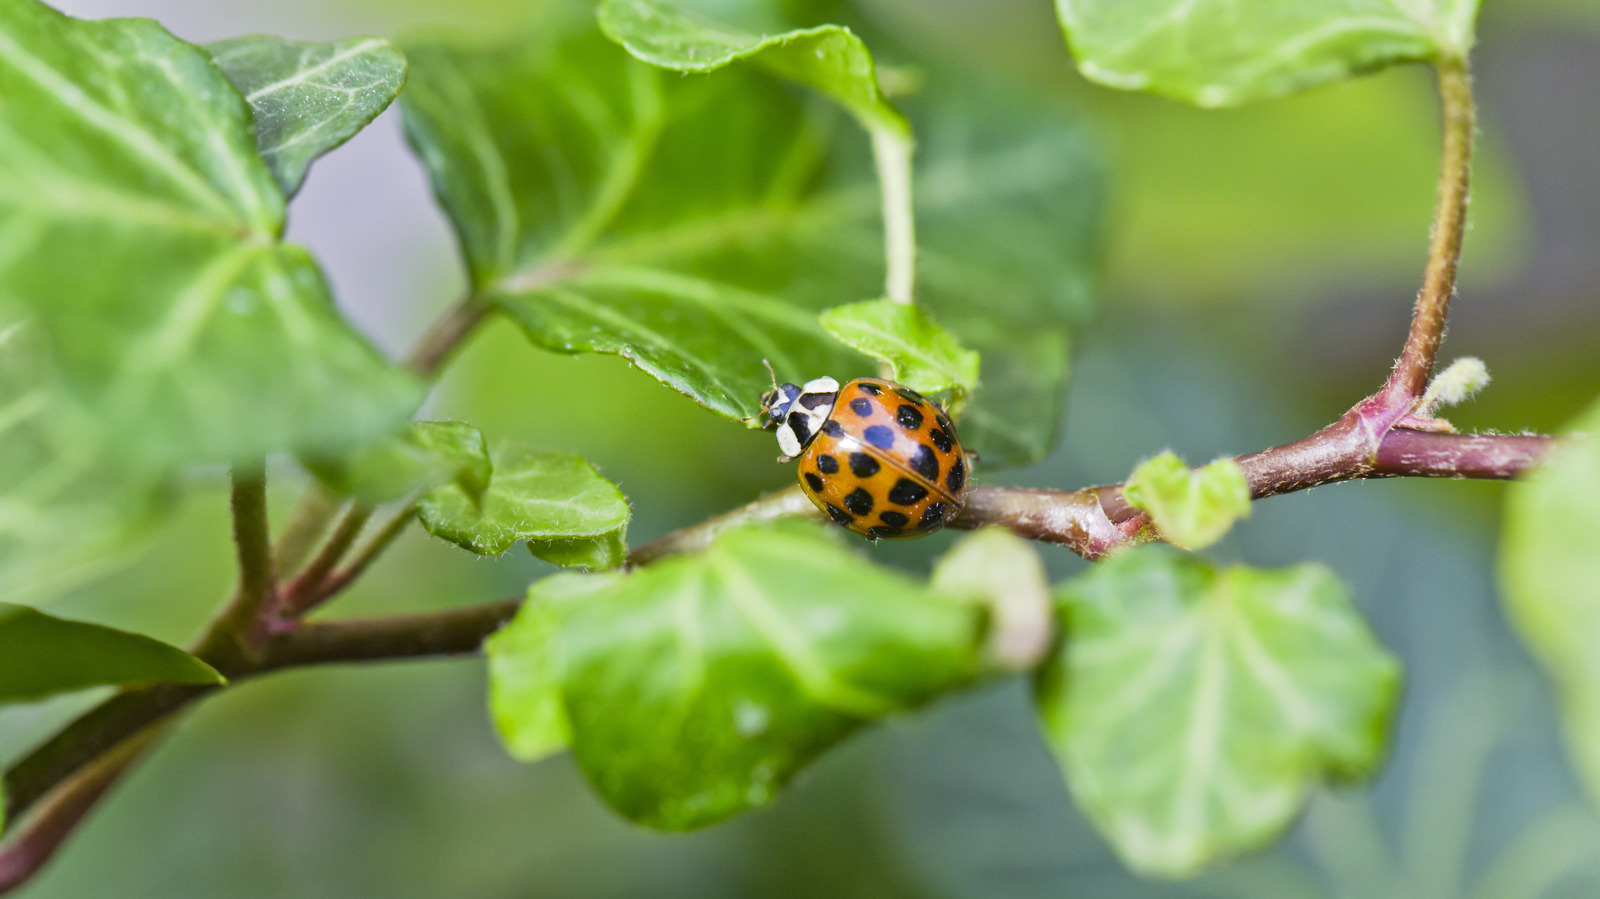 Encourage Beneficial Ladybugs To Visit Your Garden With This DIY Feeder